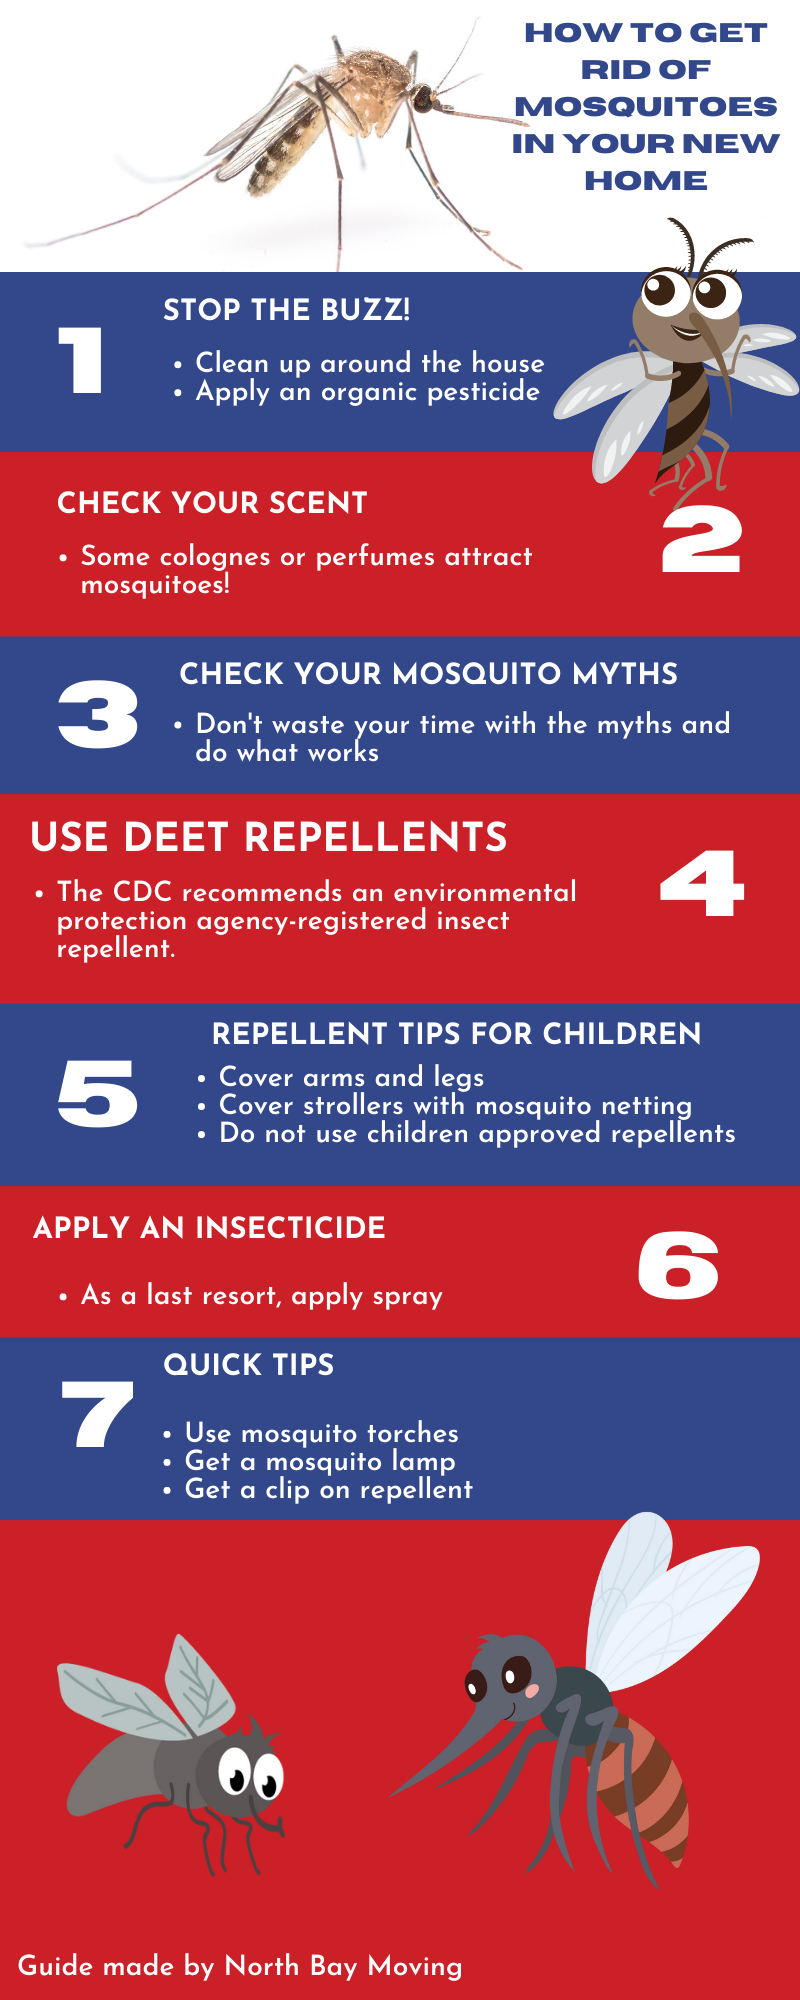 keeping mosquitoes at bay effective home pest control tips